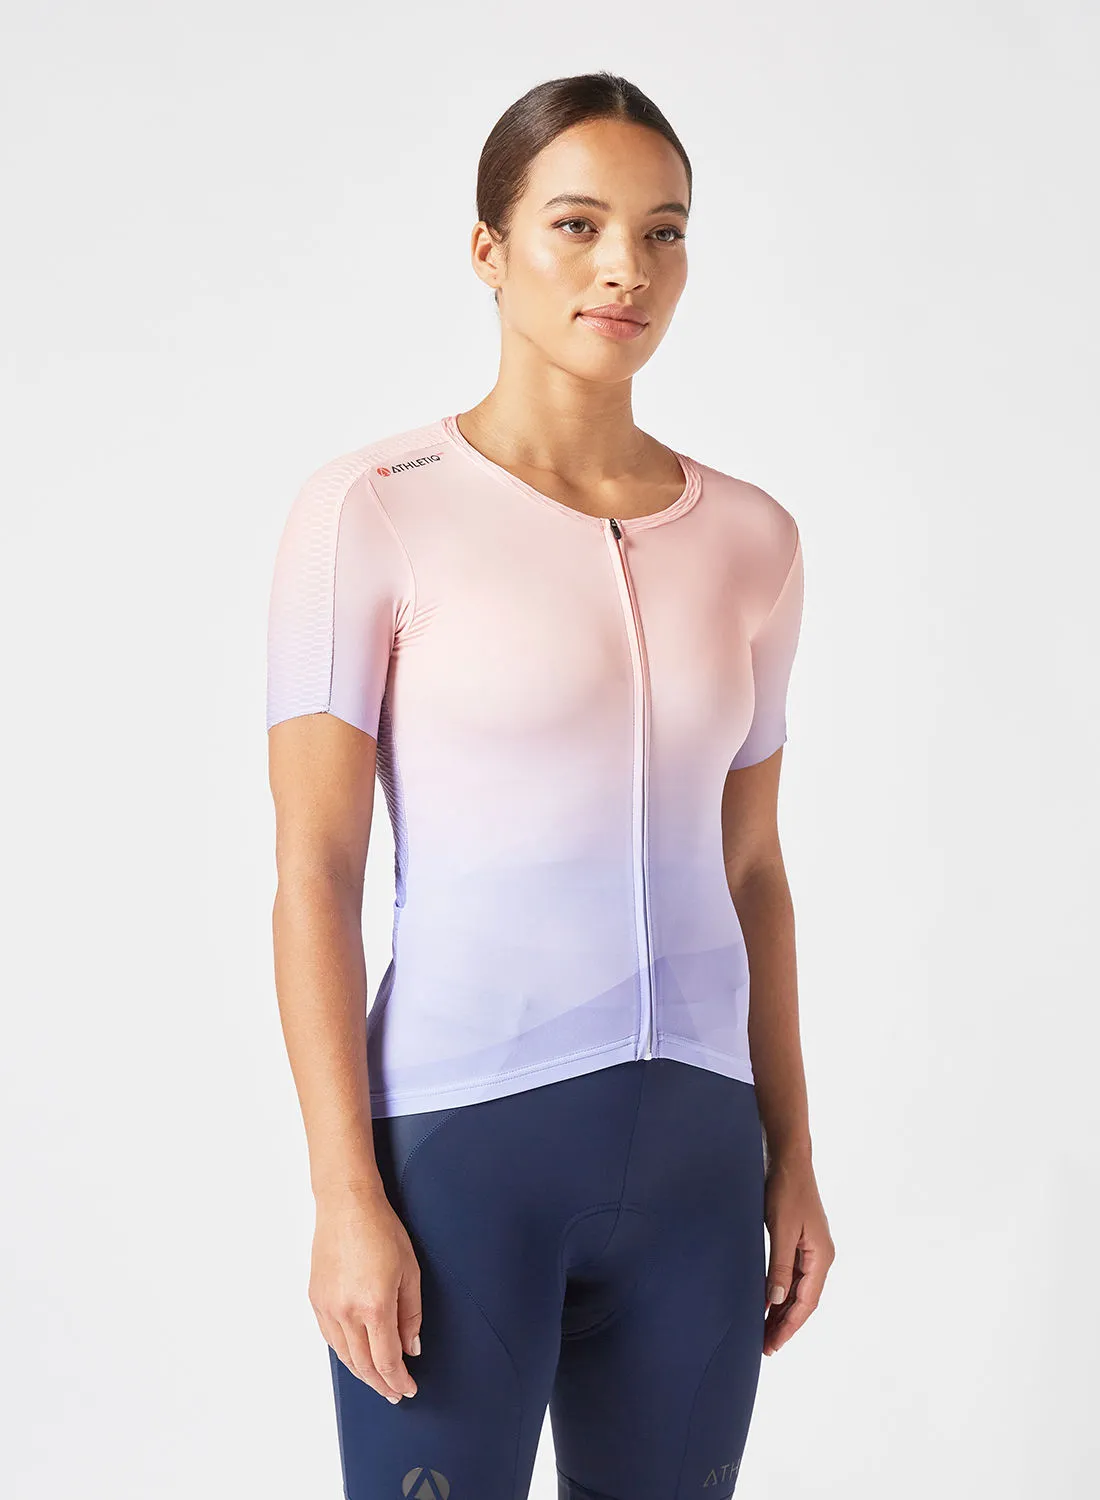 Athletiq Pro Hardknott Pass - Cycling Jersey Women - Excellence Is Earned